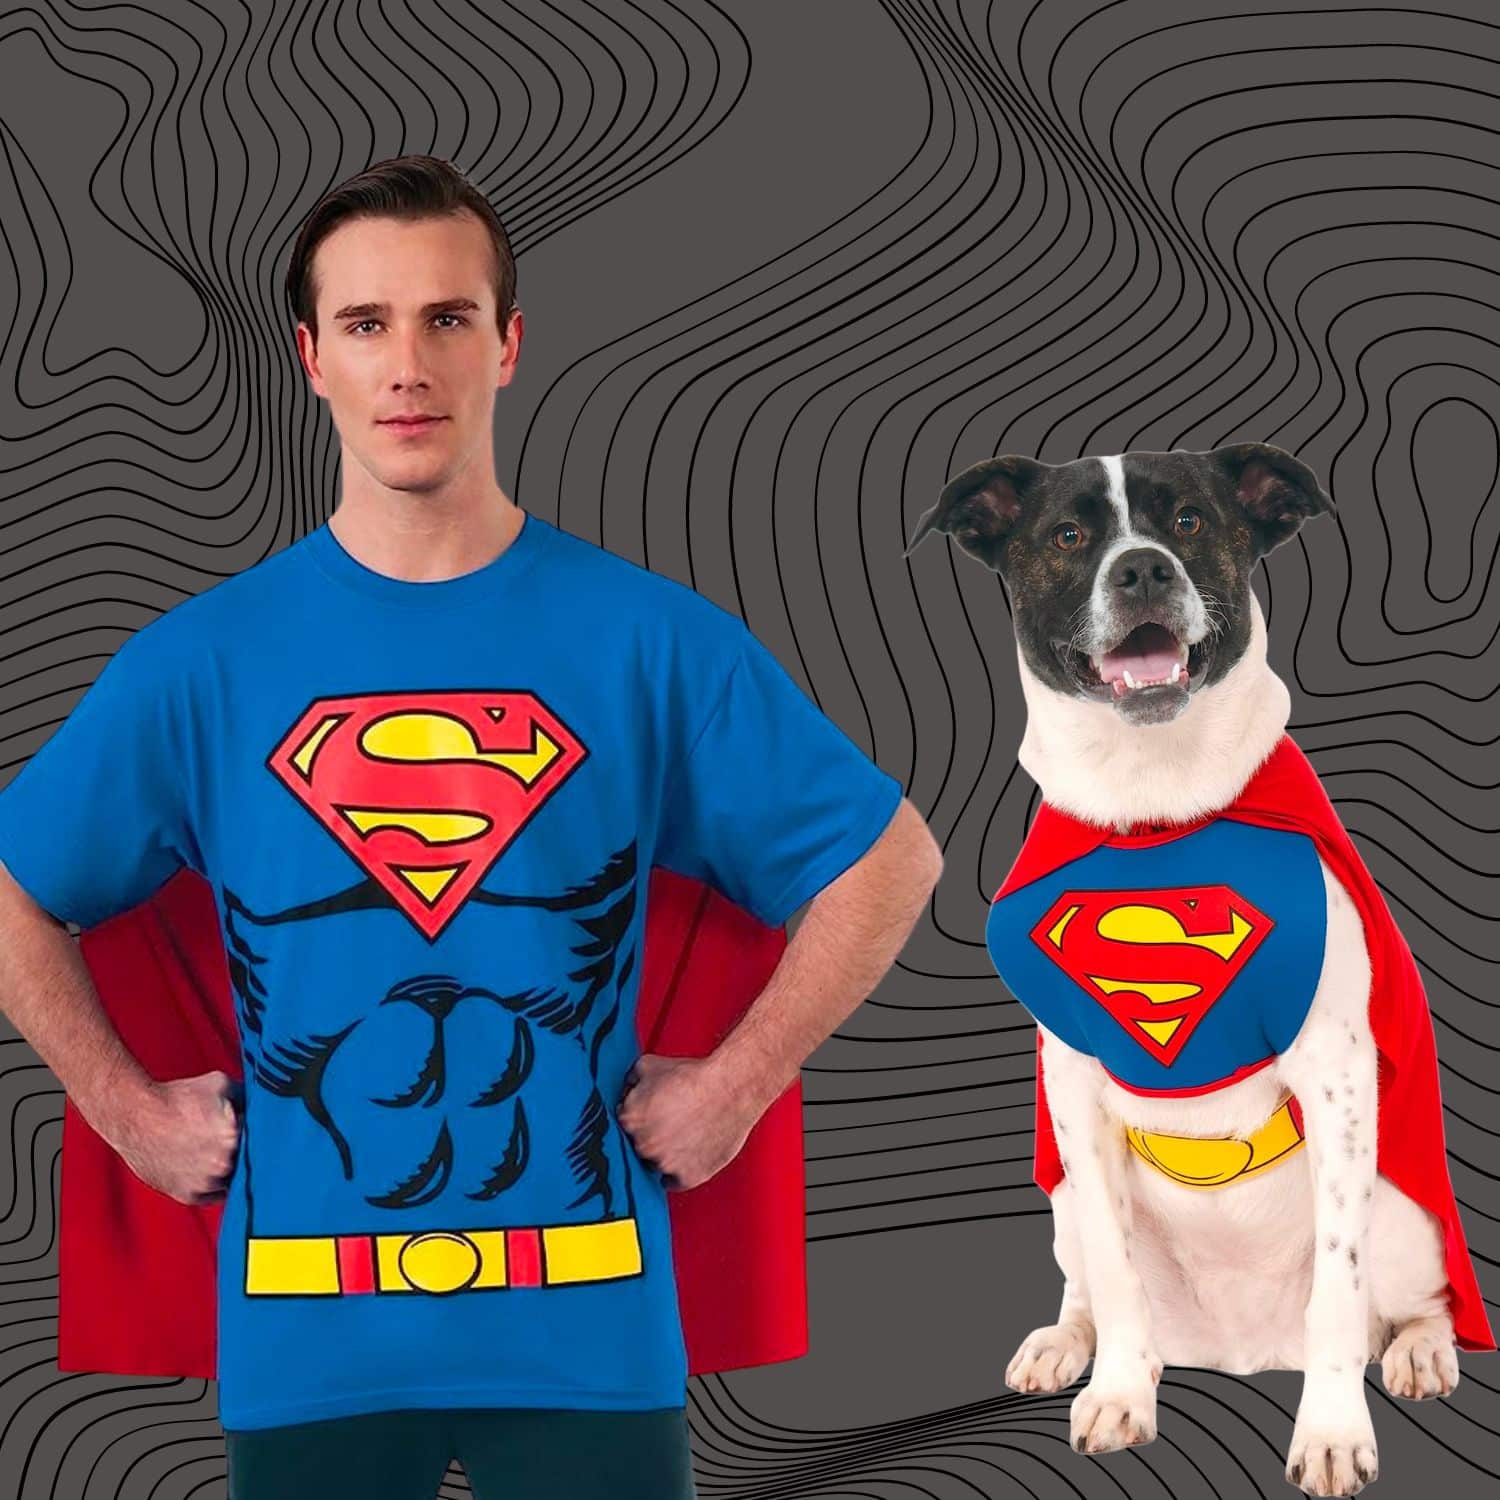 Dog And Owner Halloween Costumes Superman - Dog And Owner Halloween Costumes | Pawcool ™